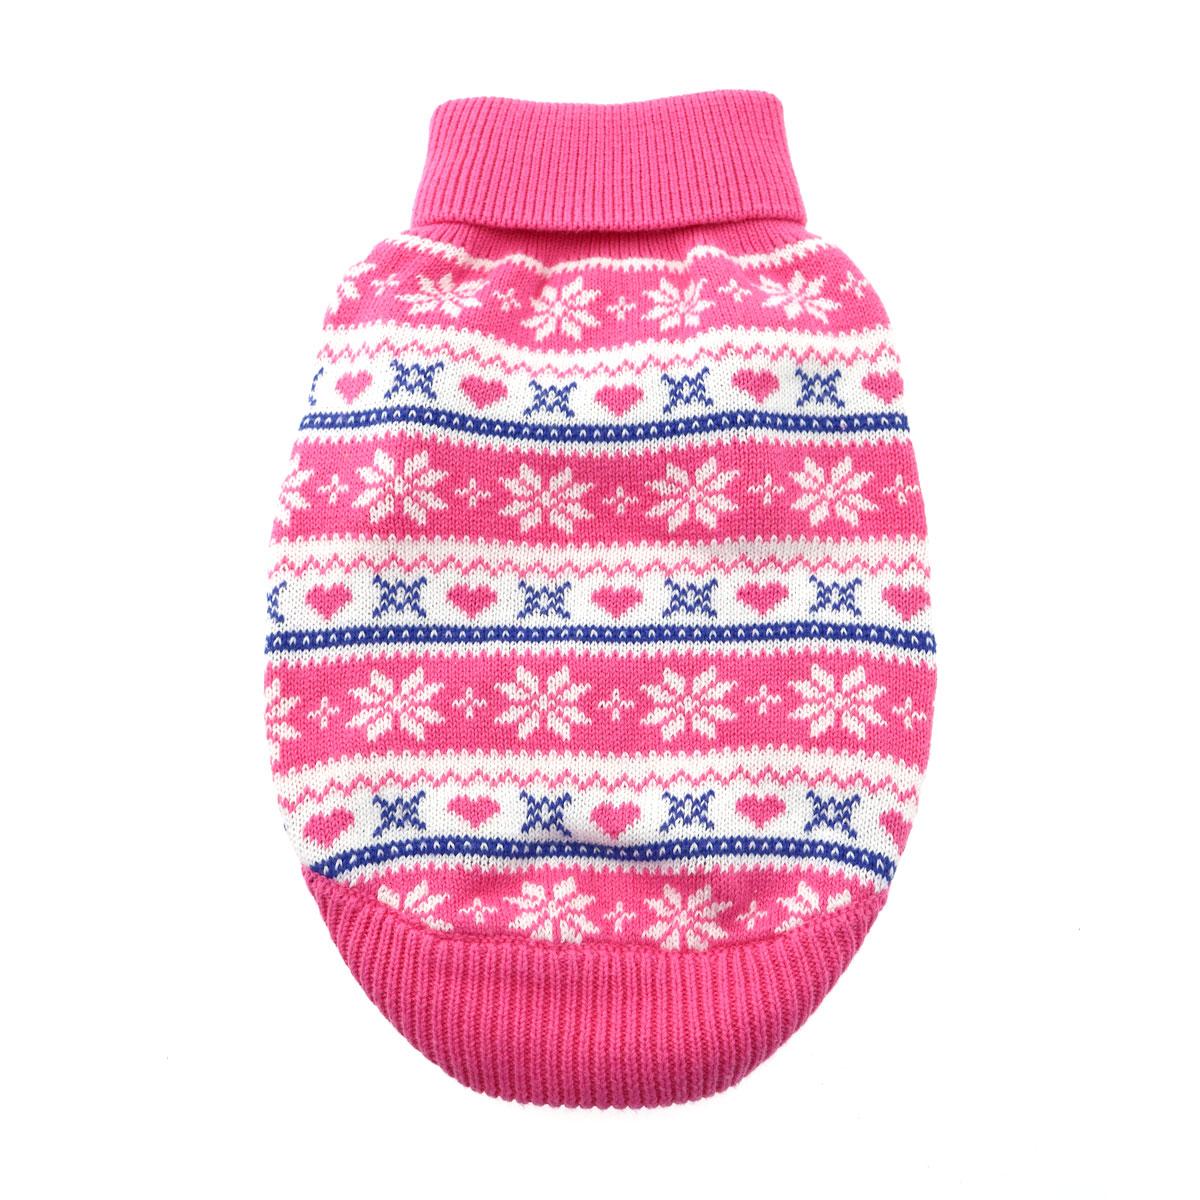 Snowflake and Hearts Dog Sweater by Doggie Design - Pink